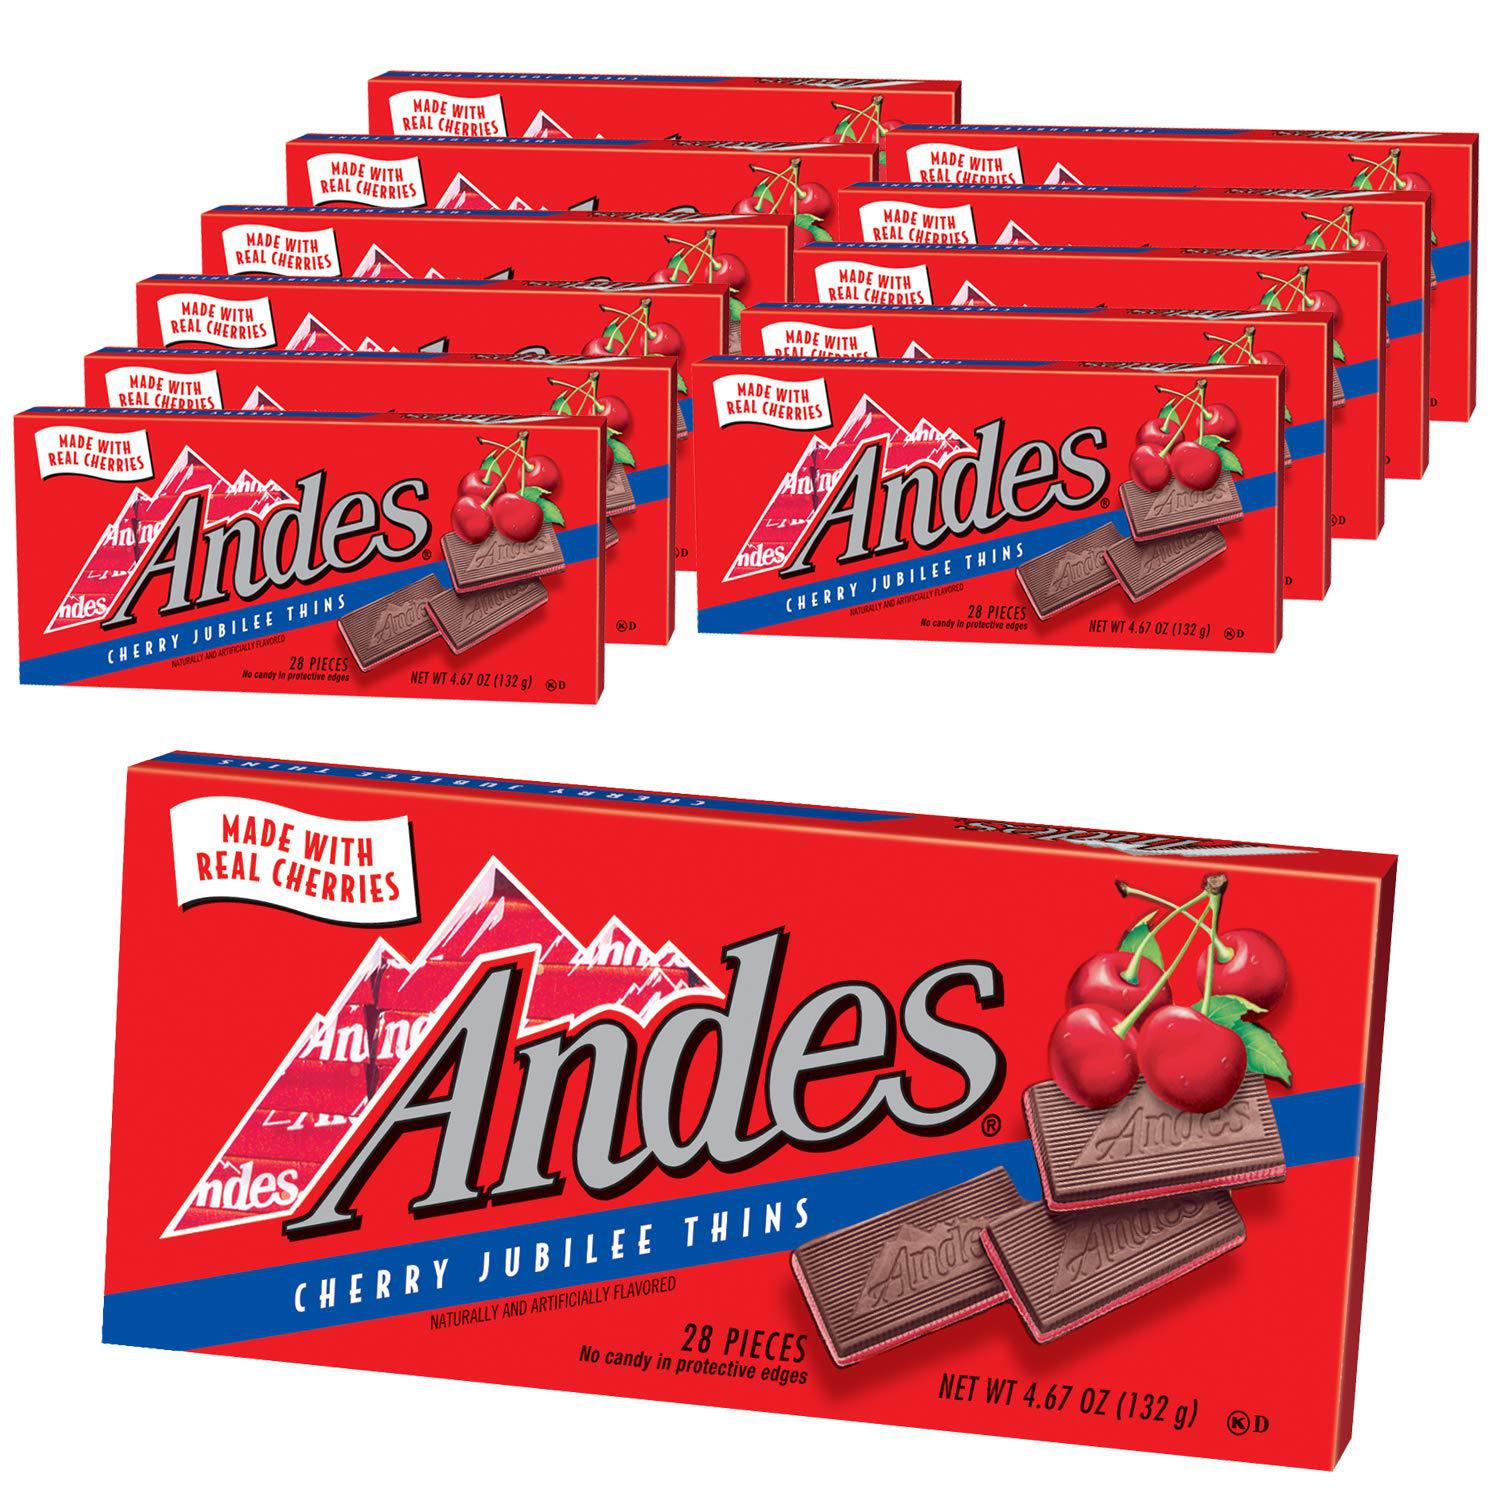 Charms-Andes Cherry Jubilee Thins 4.67 oz. Box-15340-12-Box of 12-Legacy Toys